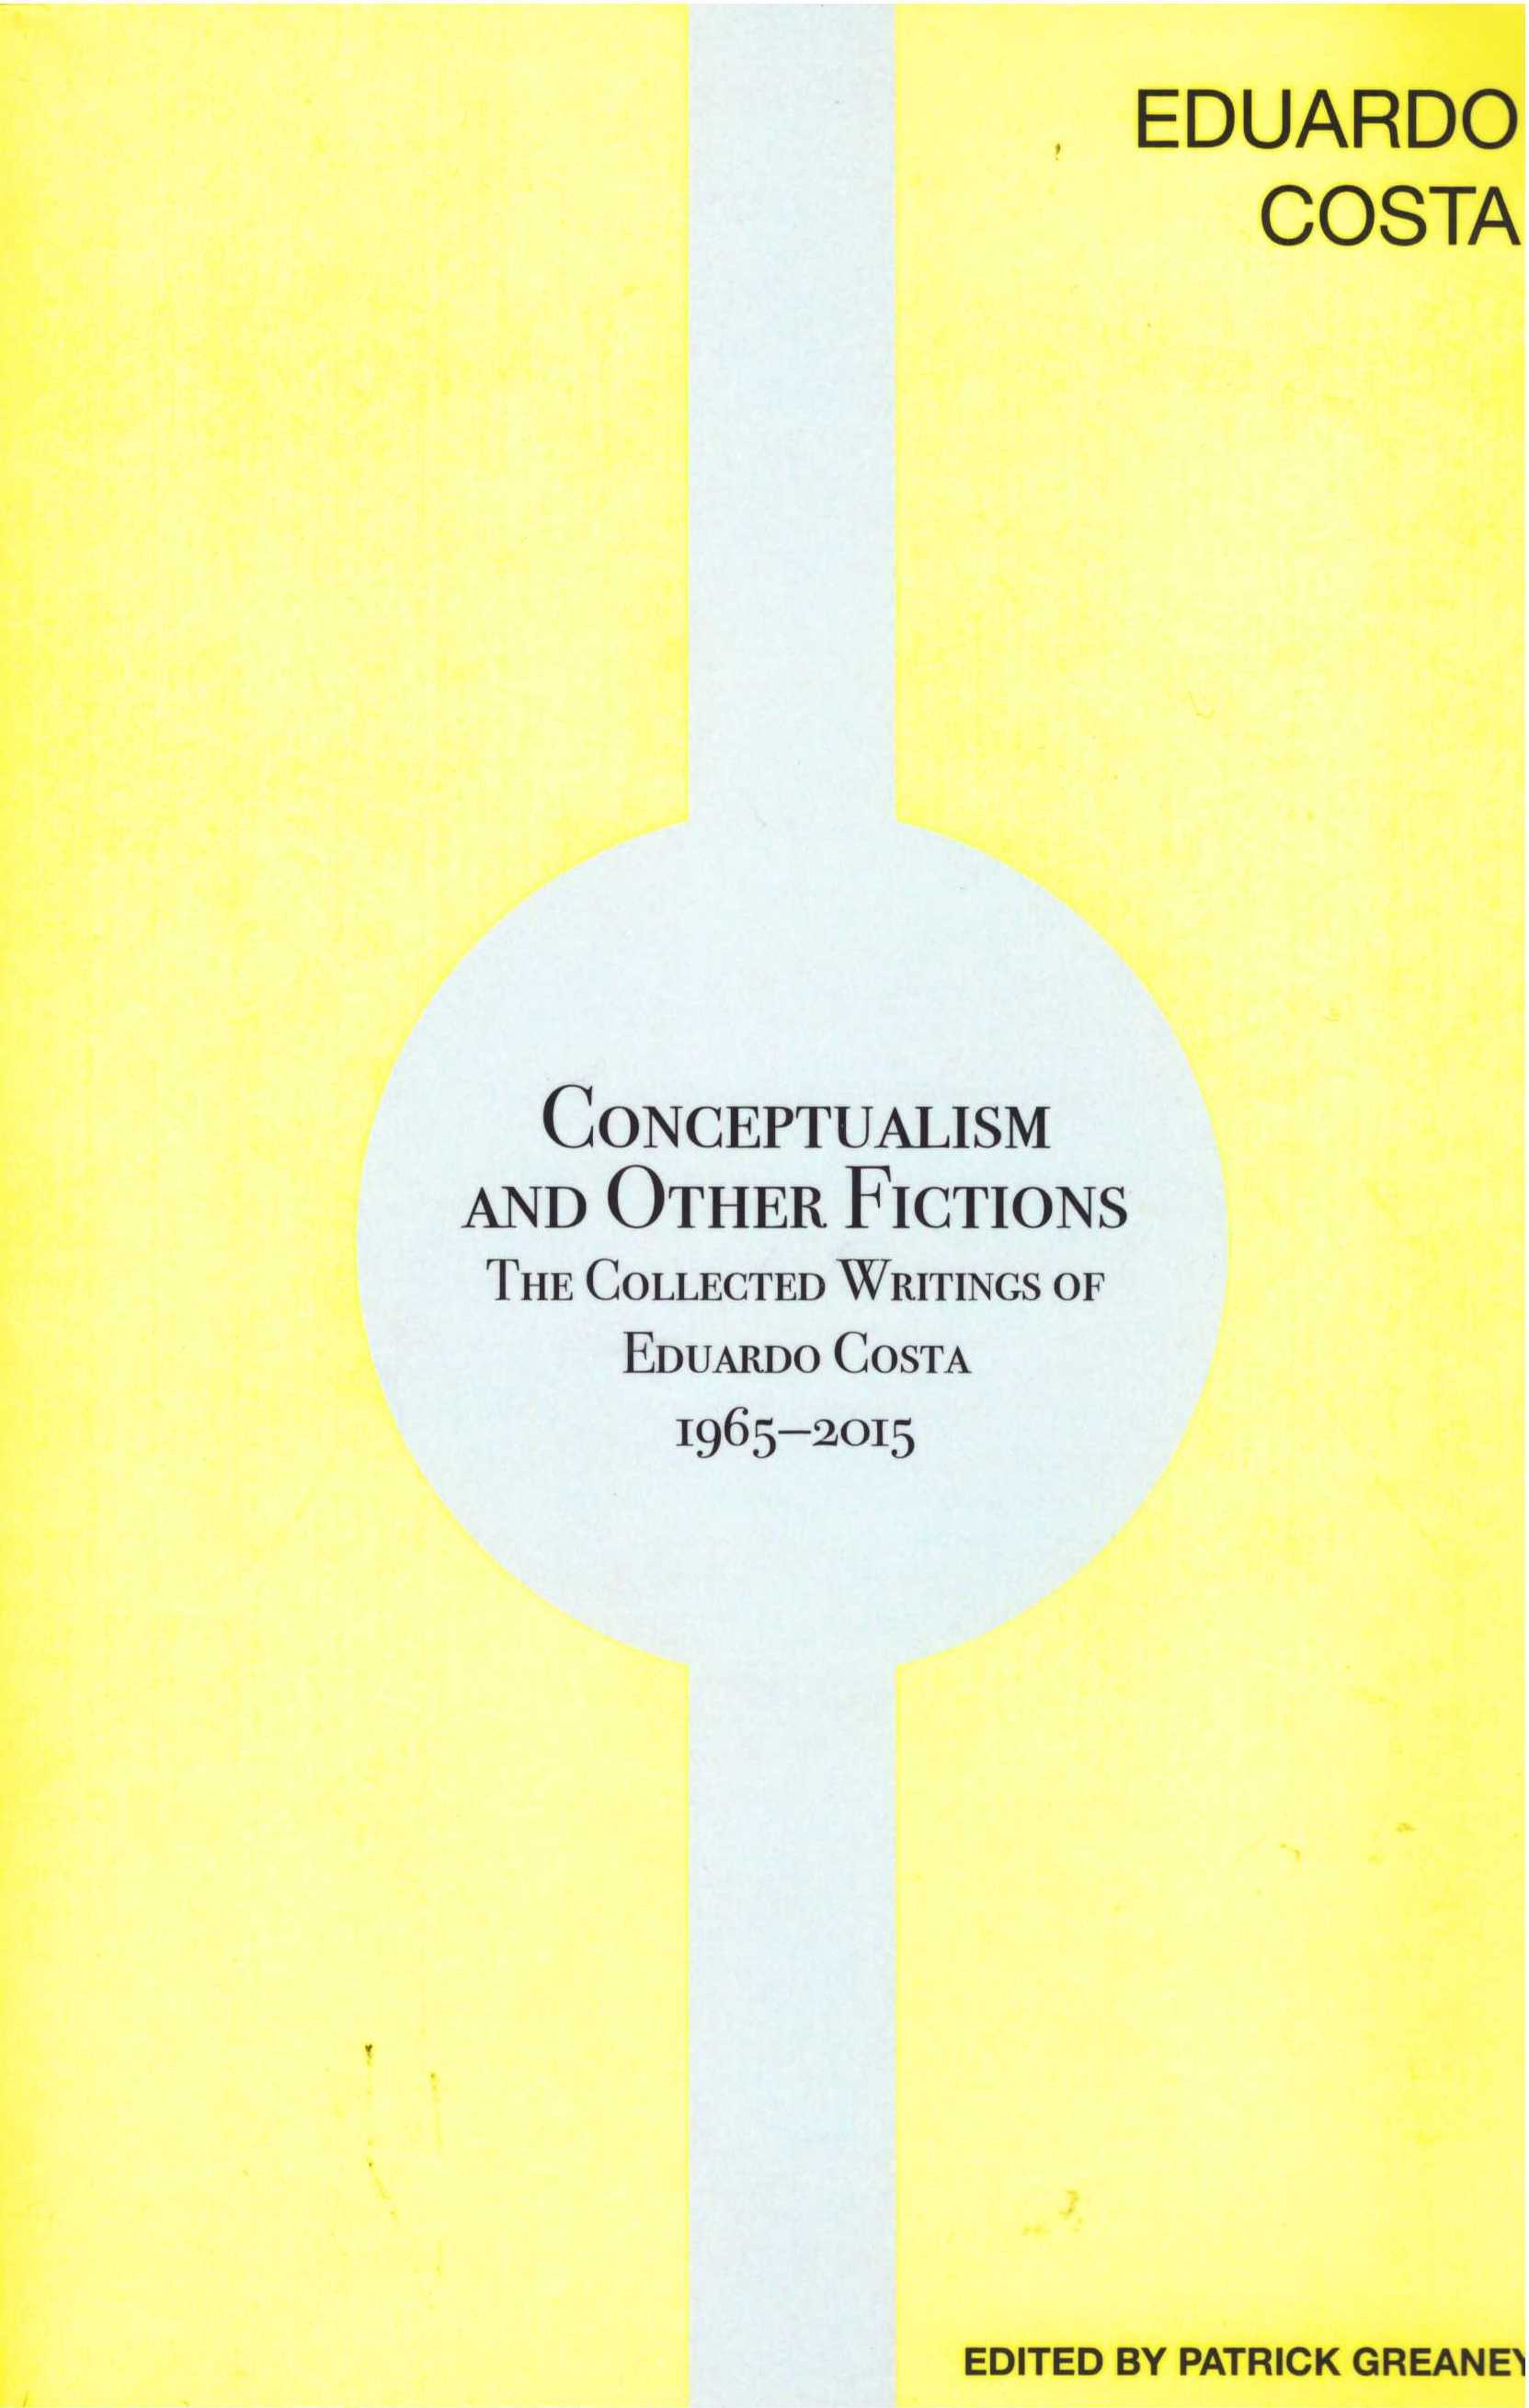 COSTA, Eduardo; GREANEY, Patrick (ed.) - Conceptualism and Other Fictions: The Collected Writings of Eduardo Costa (1965-2015)